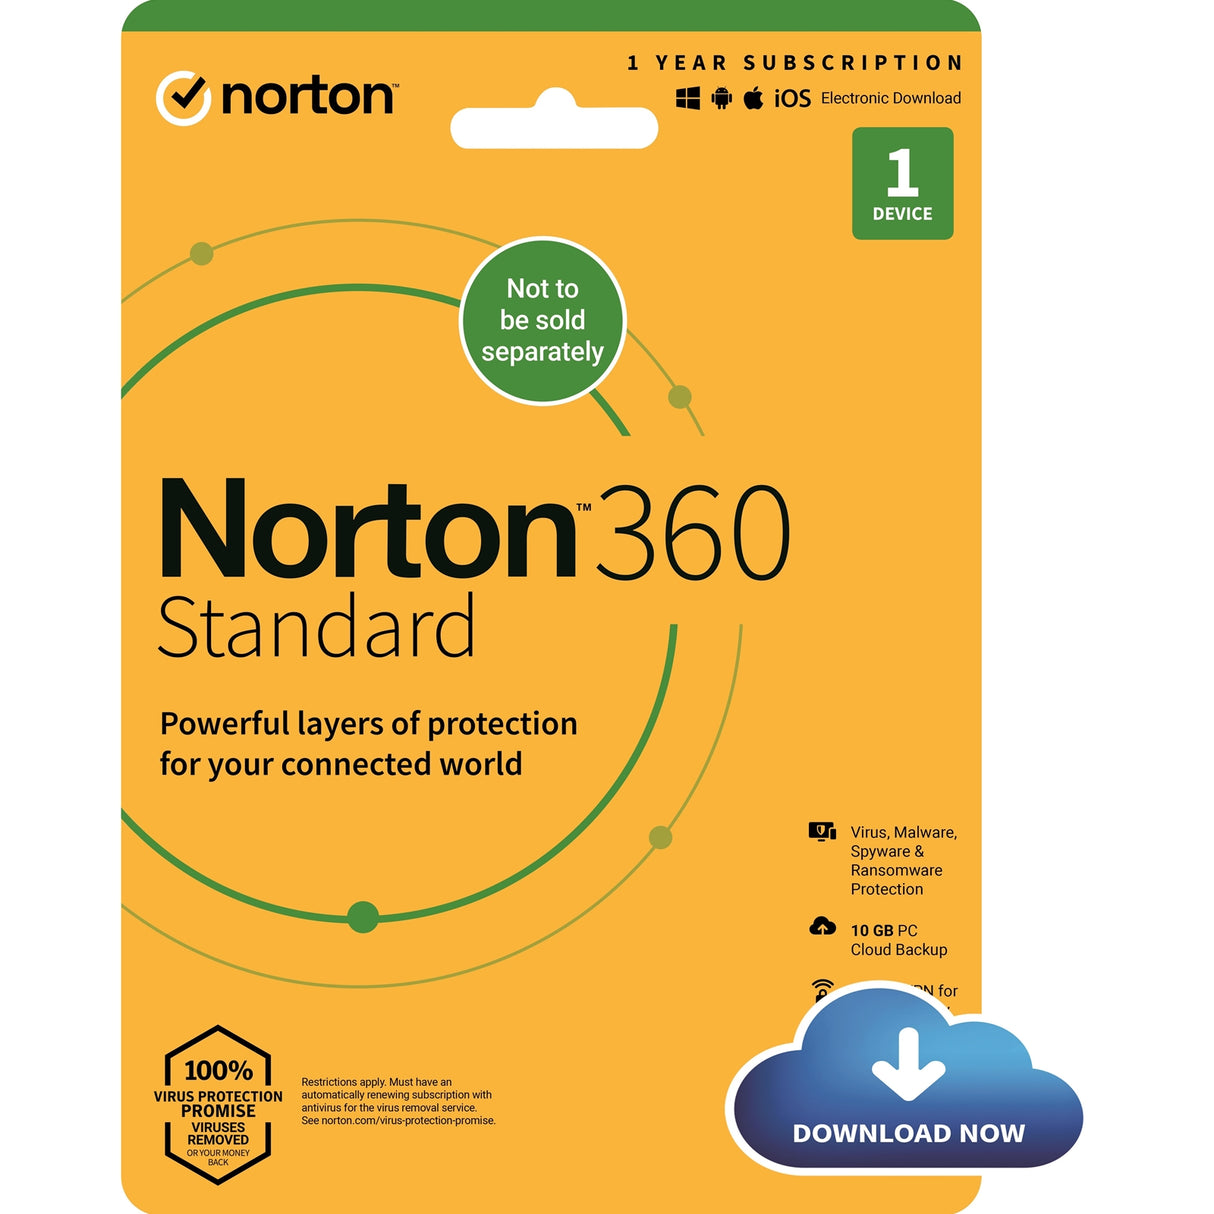 Norton 360 Standard 2022, Antivirus Software for 1 Device, 1-year Subscription, Includes Secure VPN, Password Manager and 10GB of Cloud Storage, PC/Mac/iOS/Android, Activation Code by email - ESD